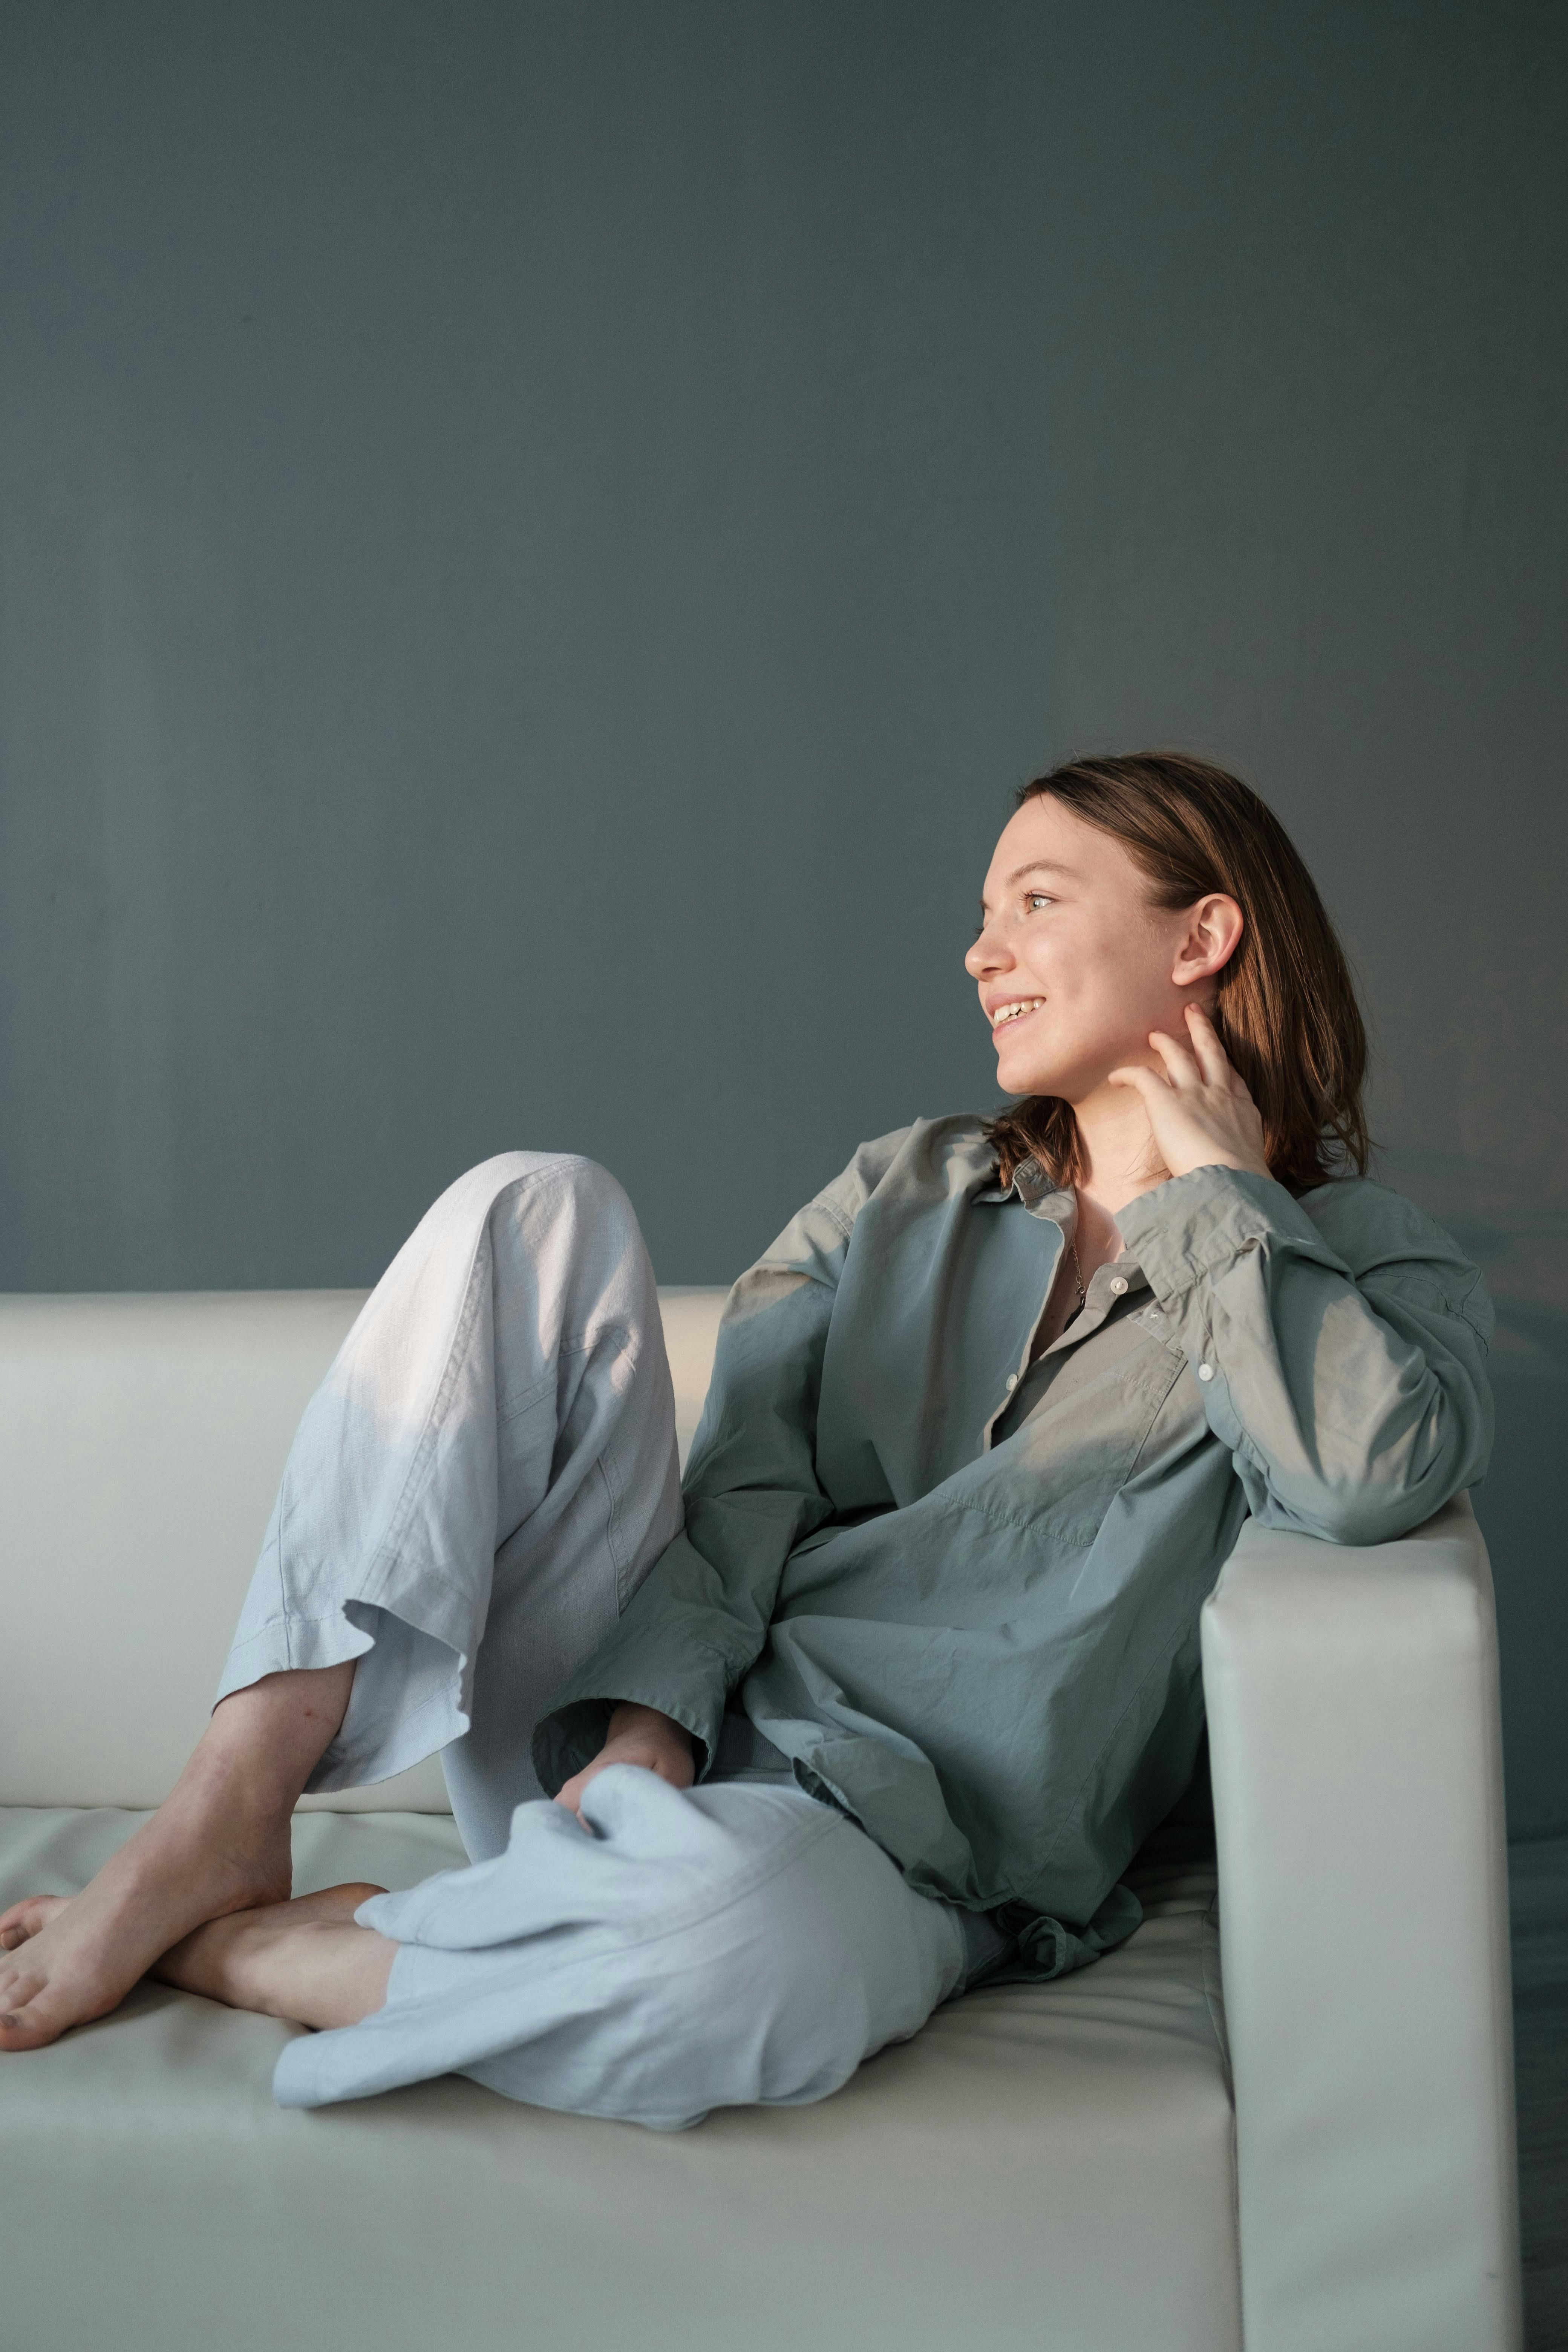 A happy woman relaxing on a couch | Source: Pexels